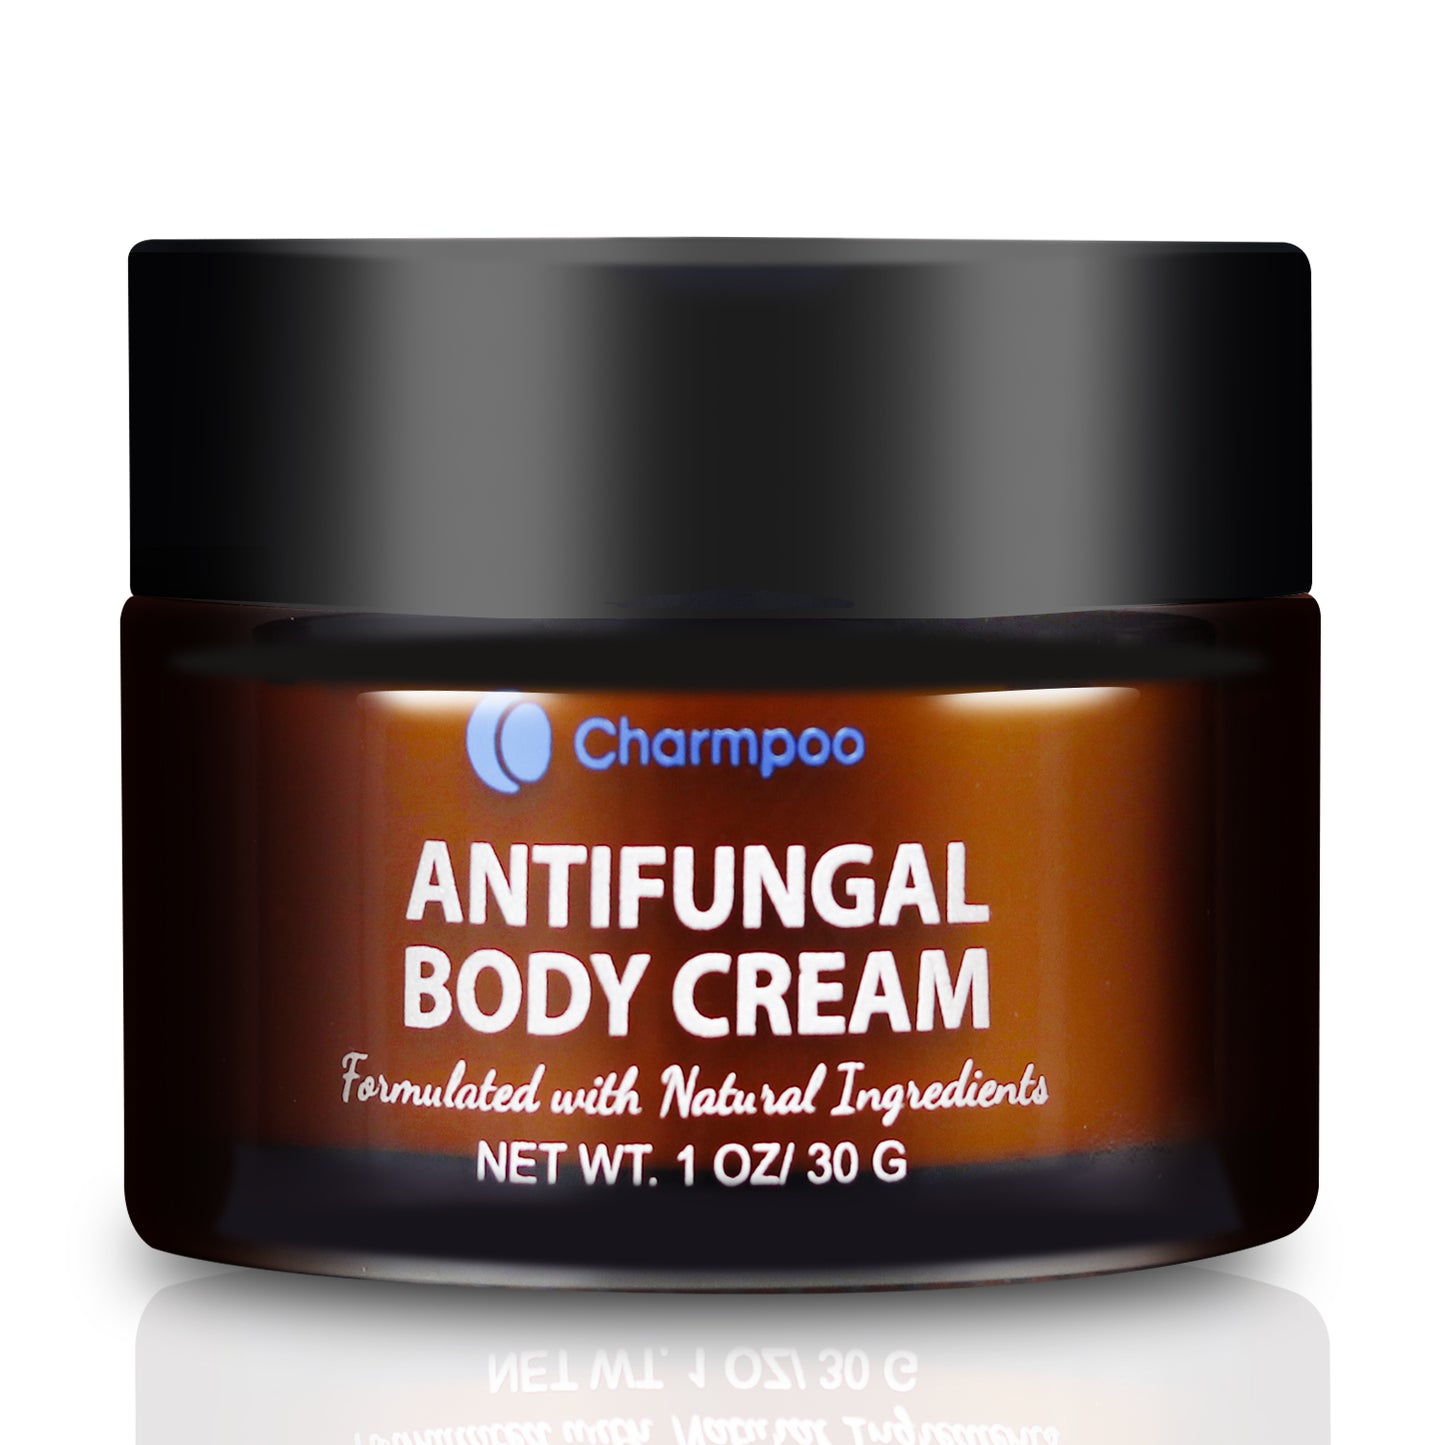 Charmpoo Antifungal Cream, Anti-Itch Cream for Athletes Foot, Eczema, Ringworm, Jock Itch and Nail Fungal Infections, Anti-Itch Balm for Face & Body, Maximum Strength-30g